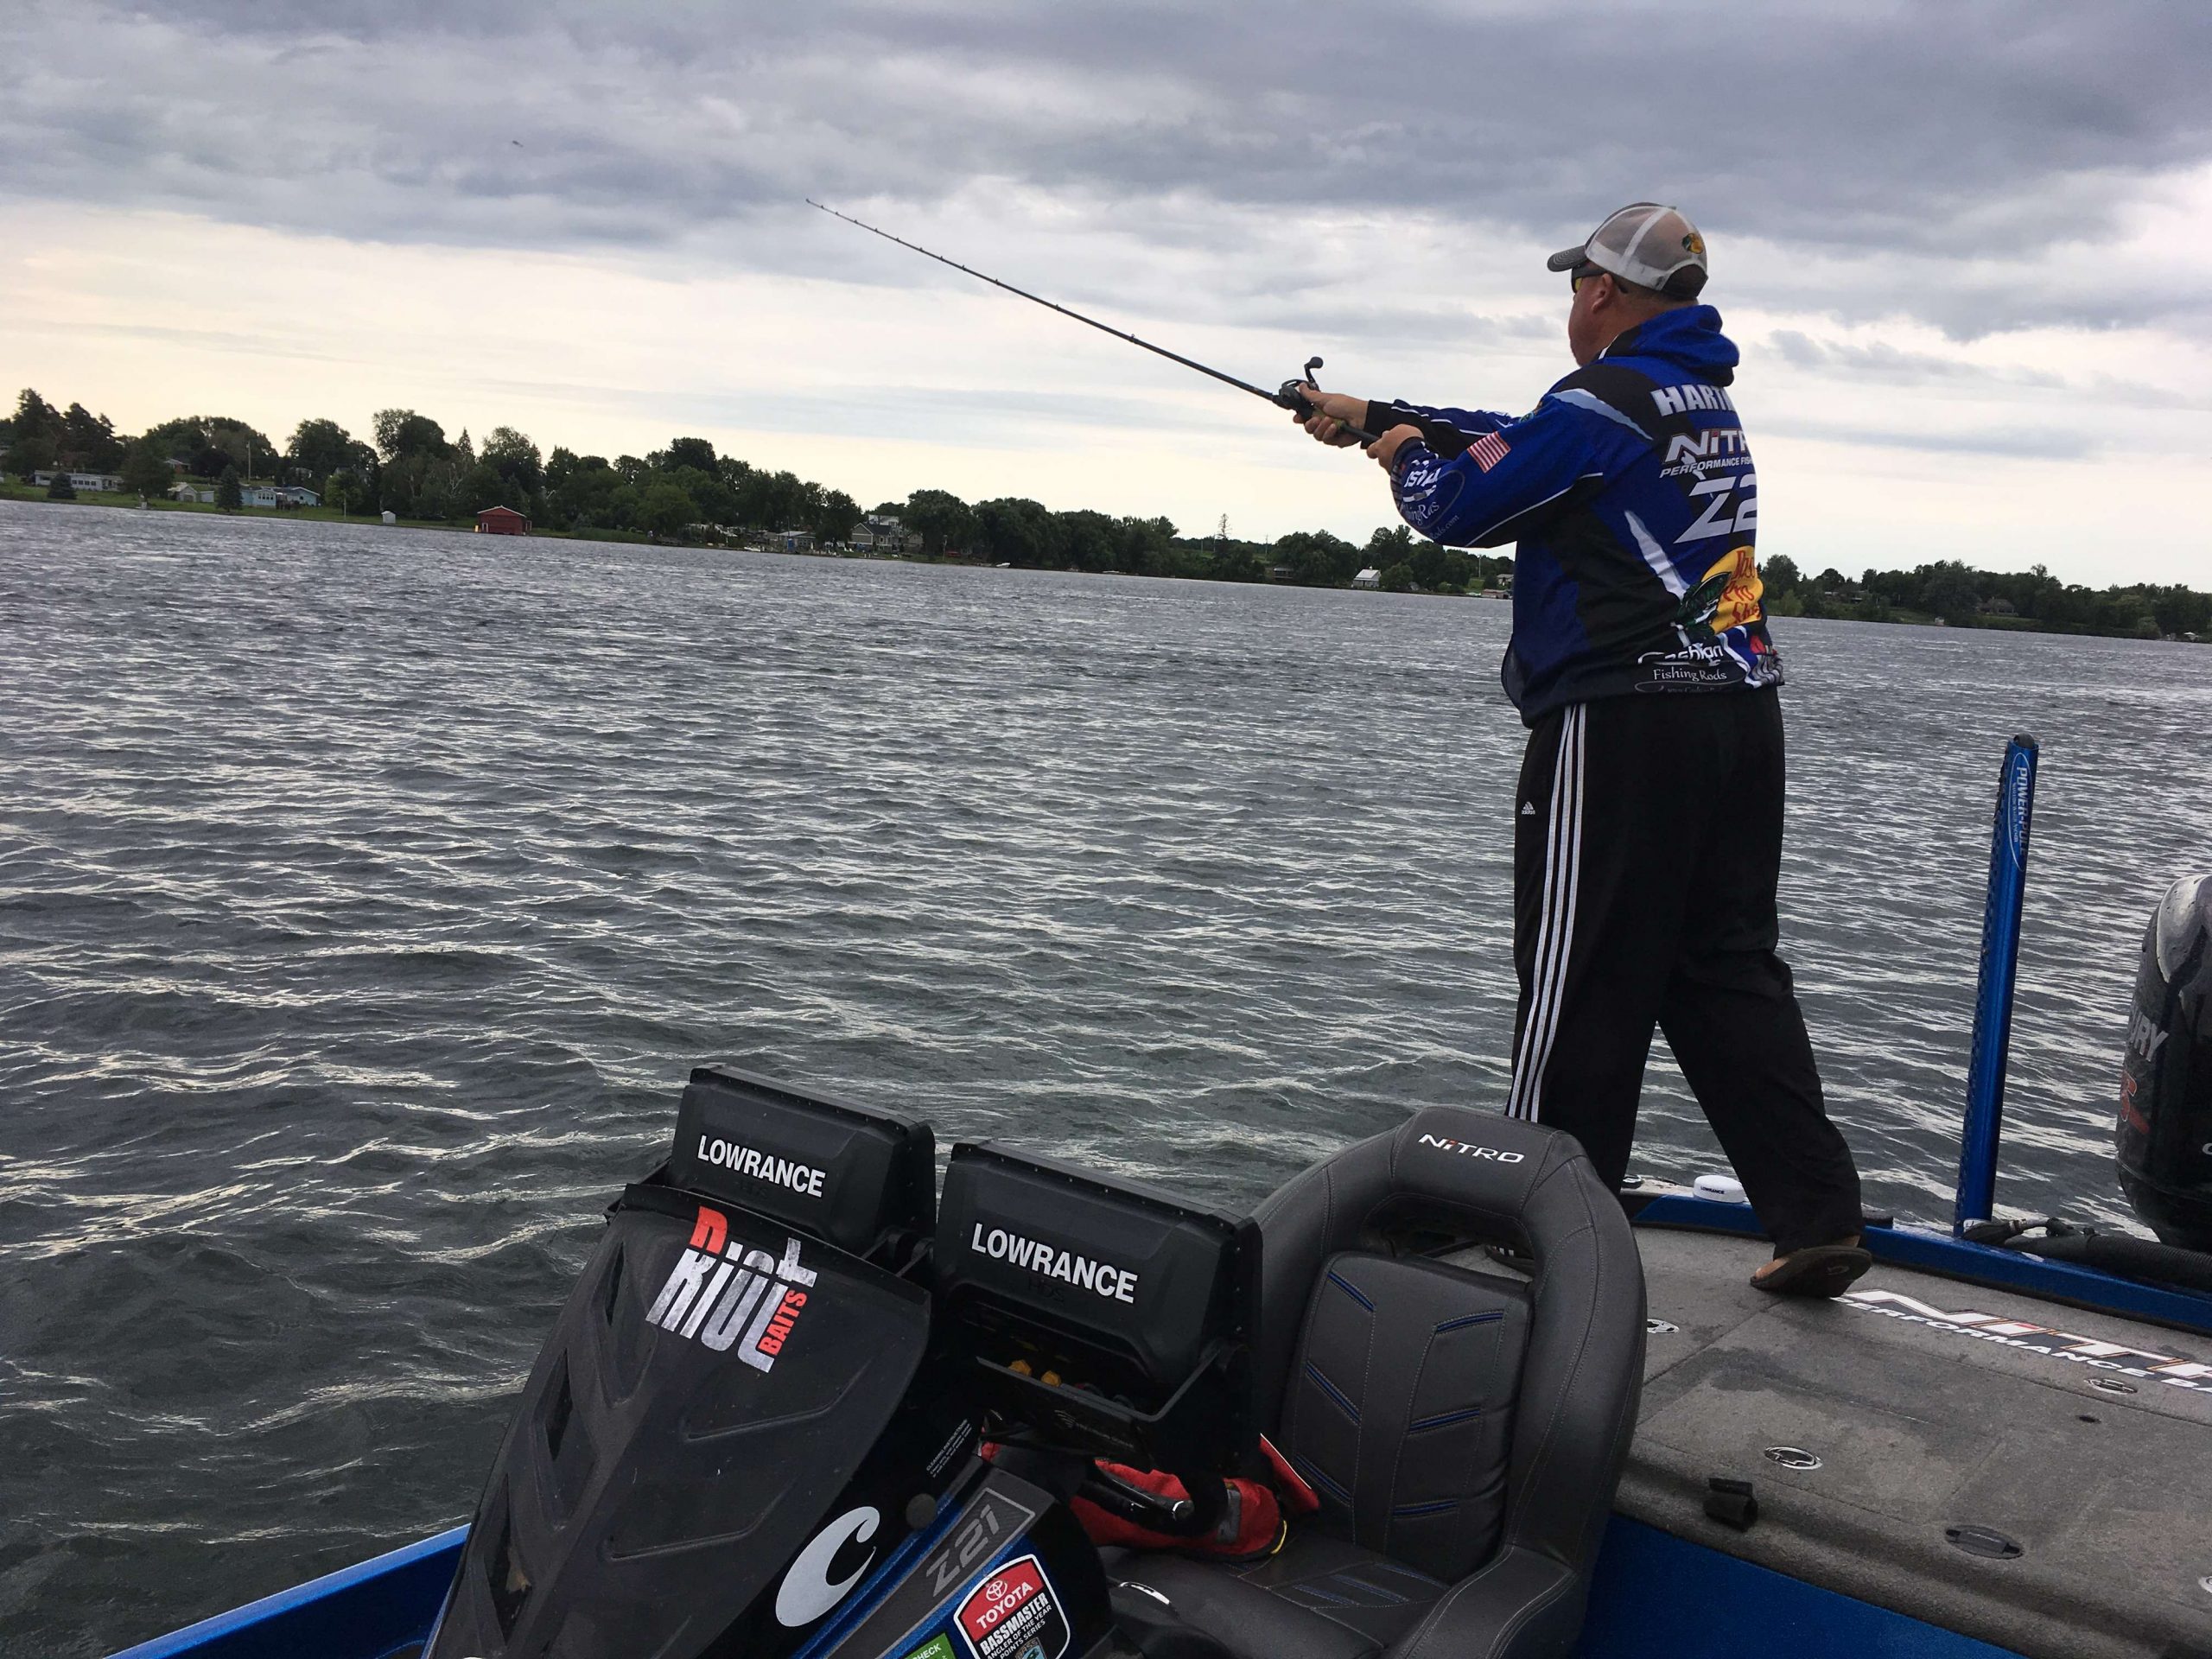 Jamie Hartman throwing out his baitcasting rod on the back deck of his boat. He's already in upgrade status & now he's in search of the giants.
